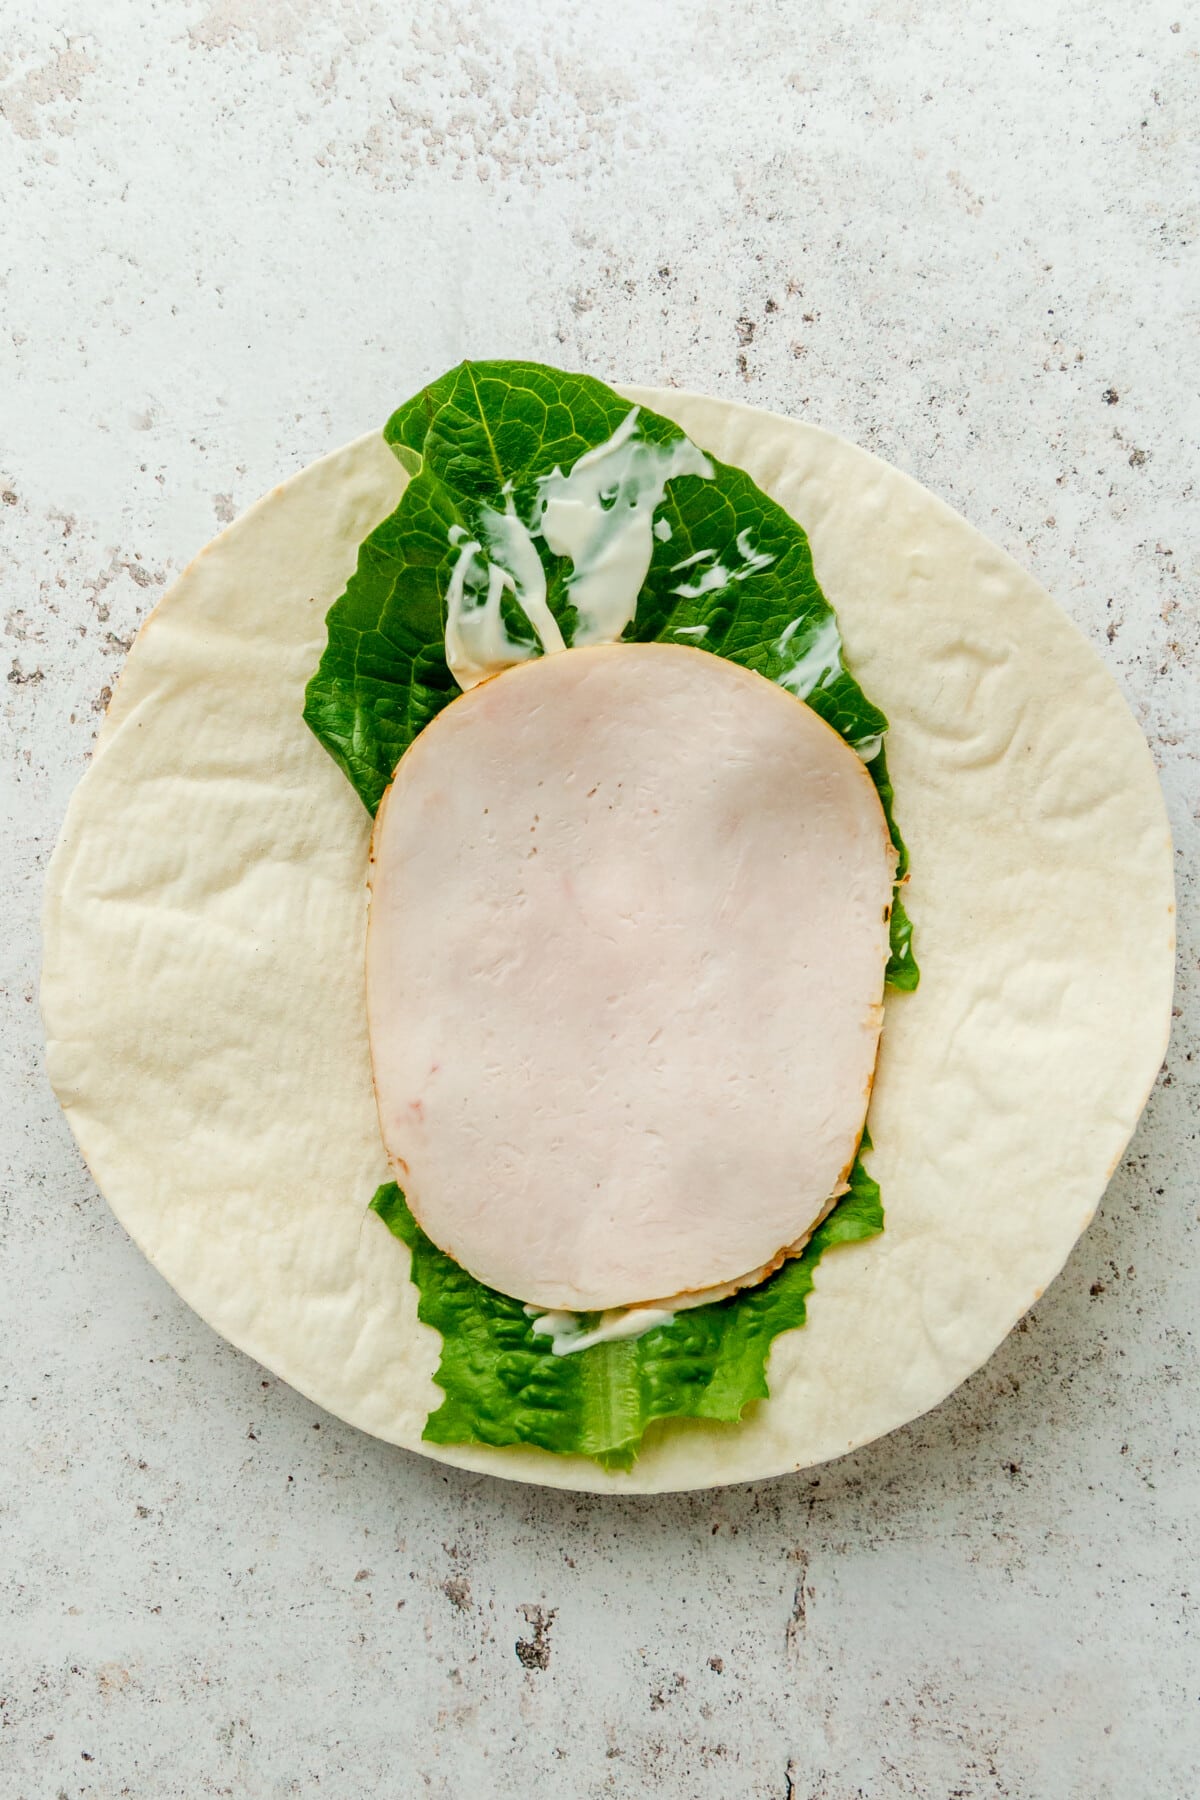 A slice of turkey sits on top of a romaine leaf on a light grey surface.